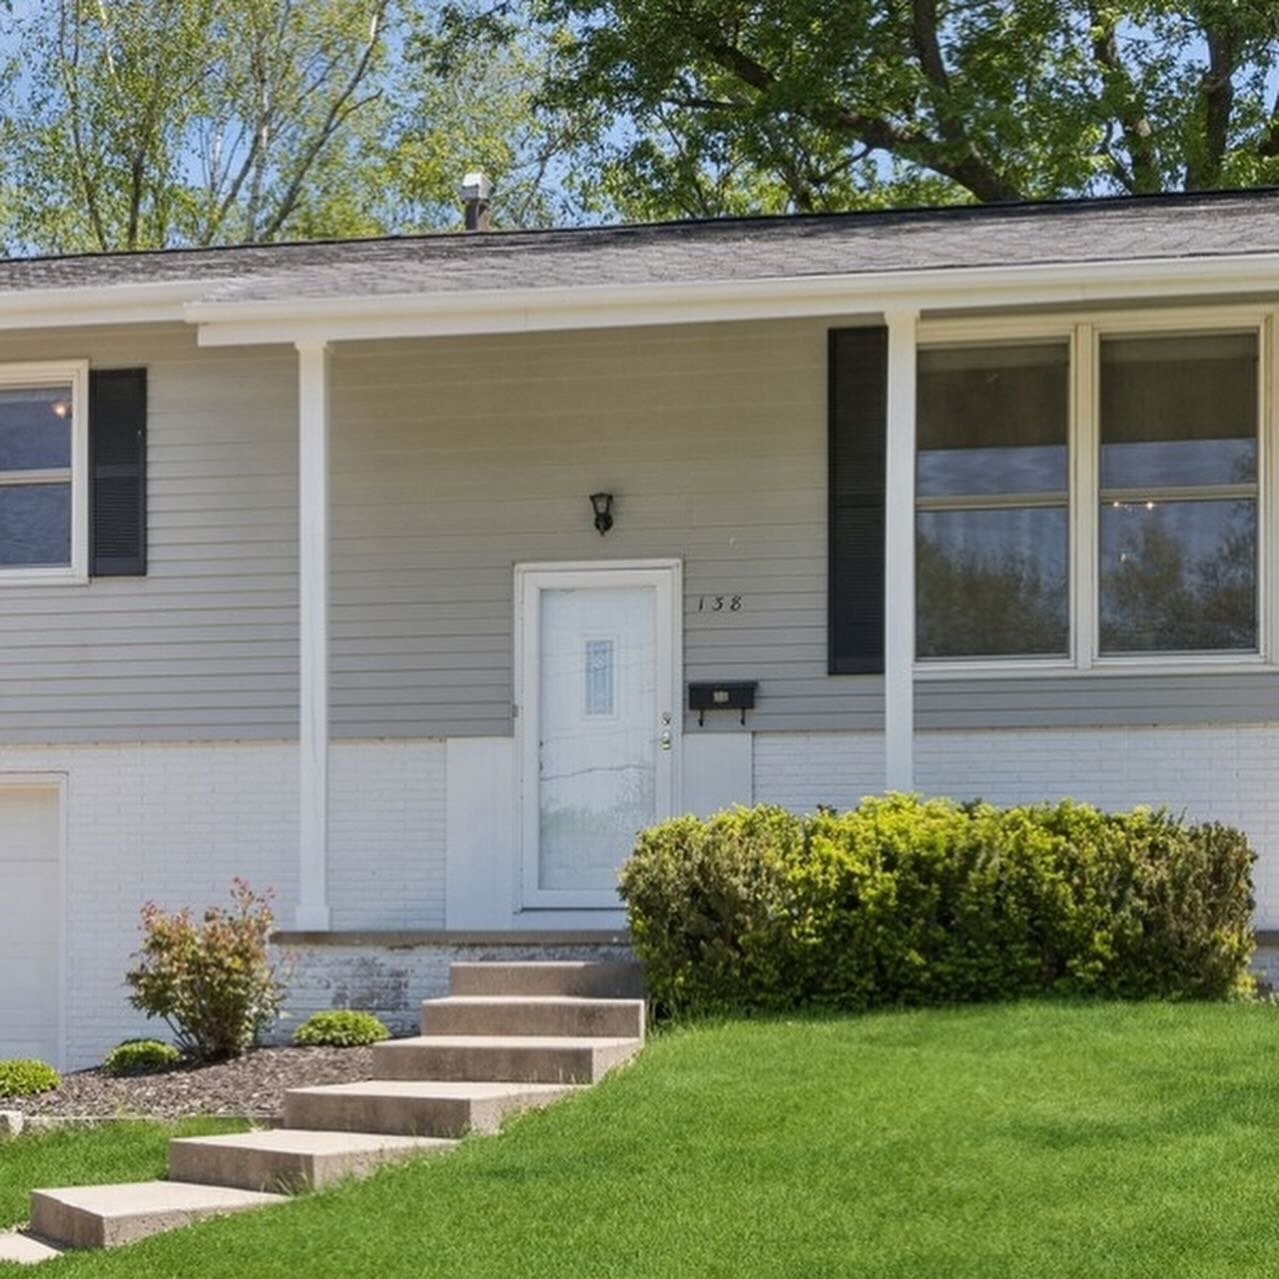 Early summer is upon us, and what better way to enjoy the beautiful Iowa City weather than from the comfort of a screened porch? Introducing 138 Dartmouth Street, featuring a spacious kitchen with seamless access to a stunning screened porch&mdash;pe